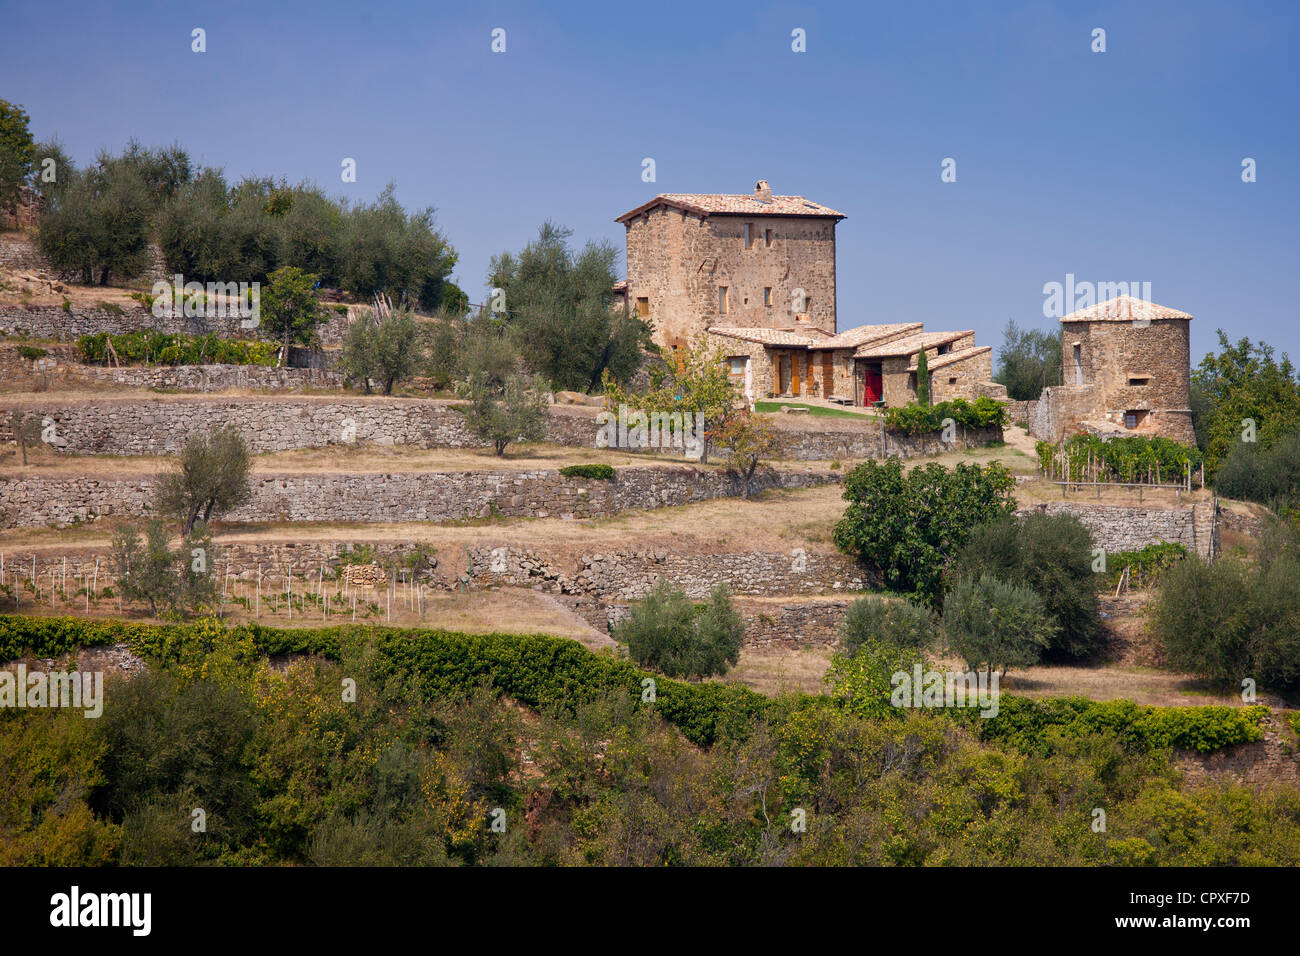 Ancient Tuscan architecture of podere farmhouse near Montalcino in Val D'Orcia, Tuscany, Italy Stock Photo